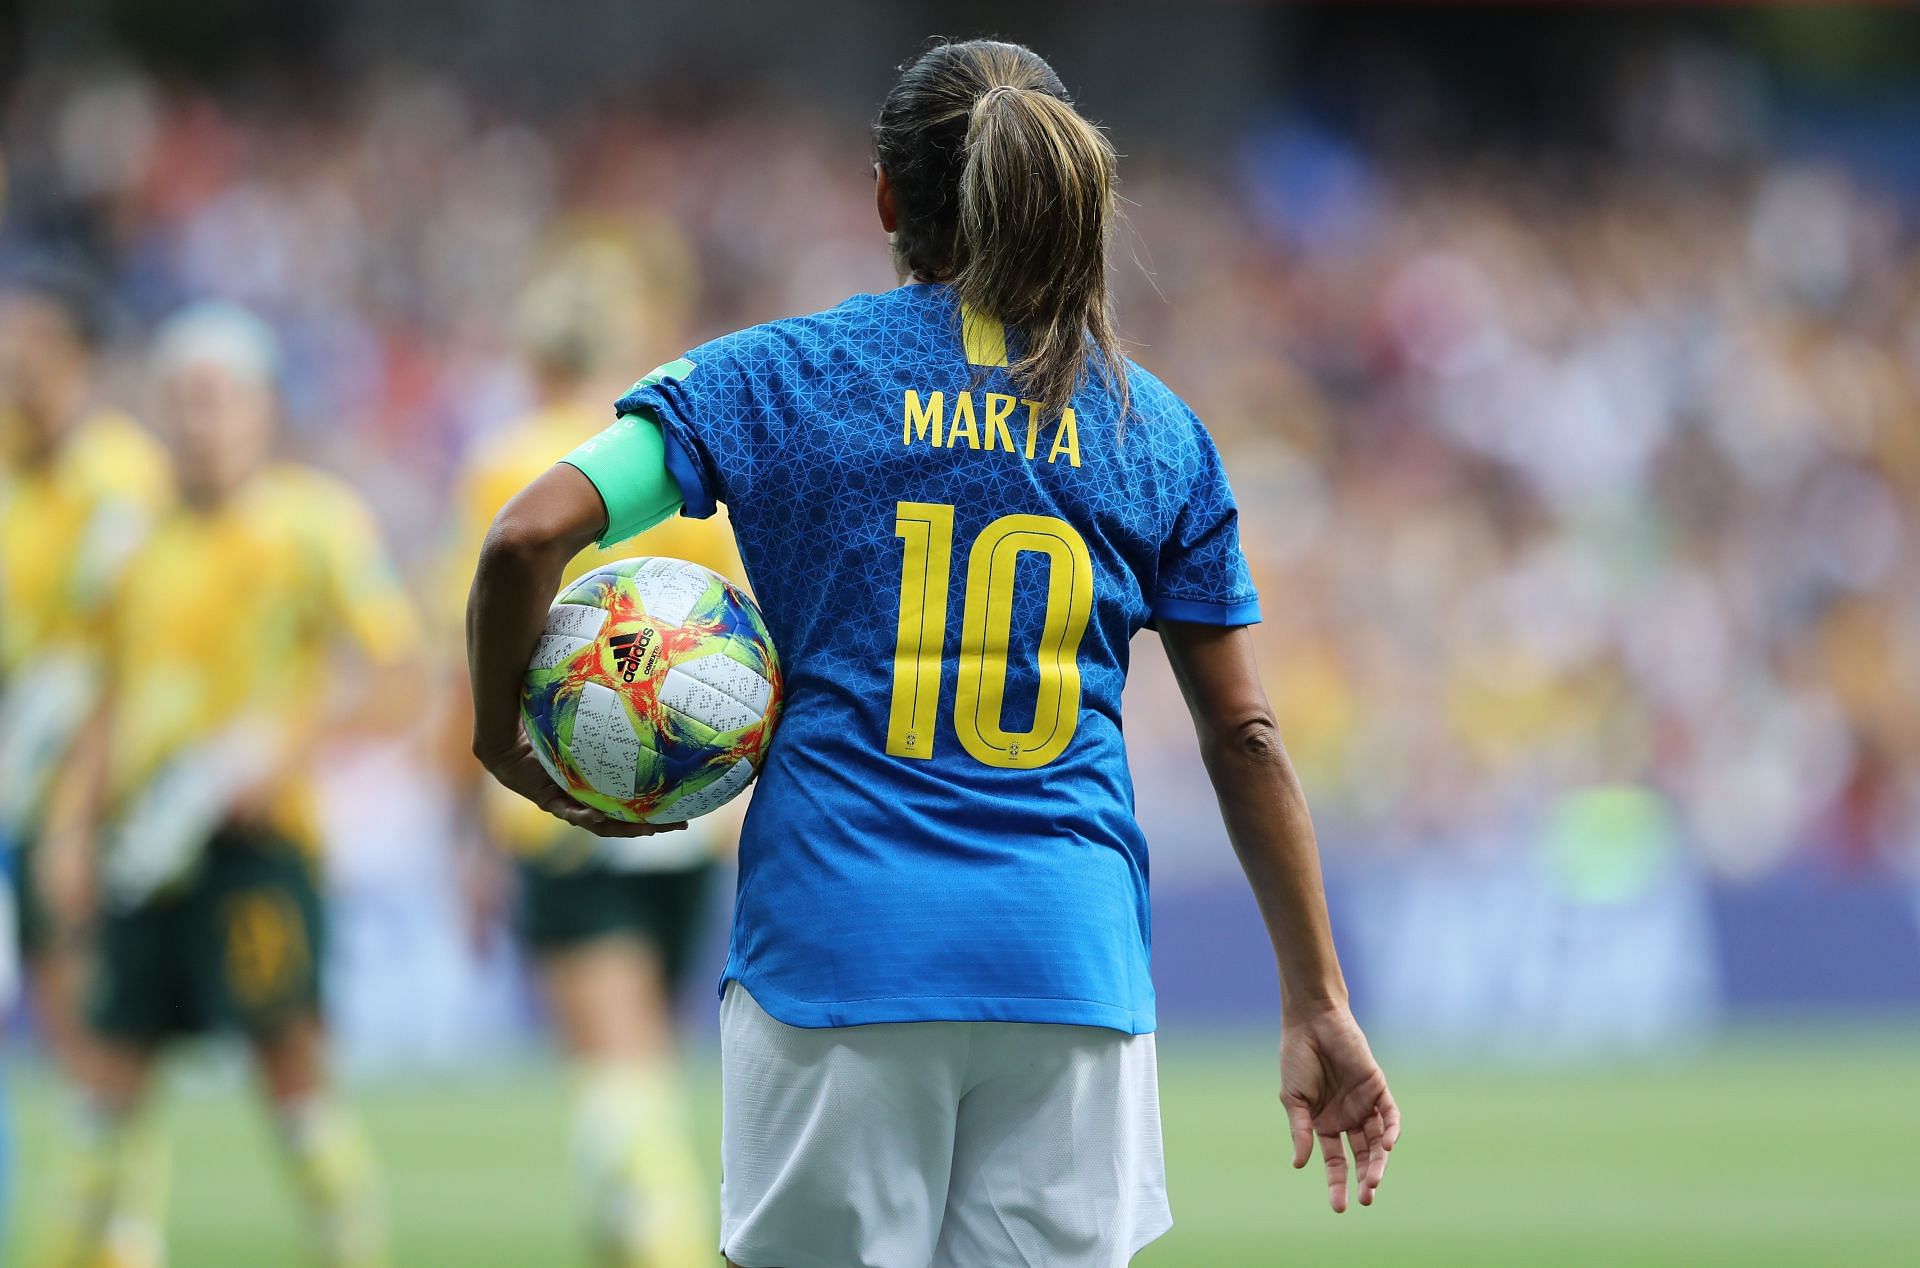 Marta has played her last World Cup game.